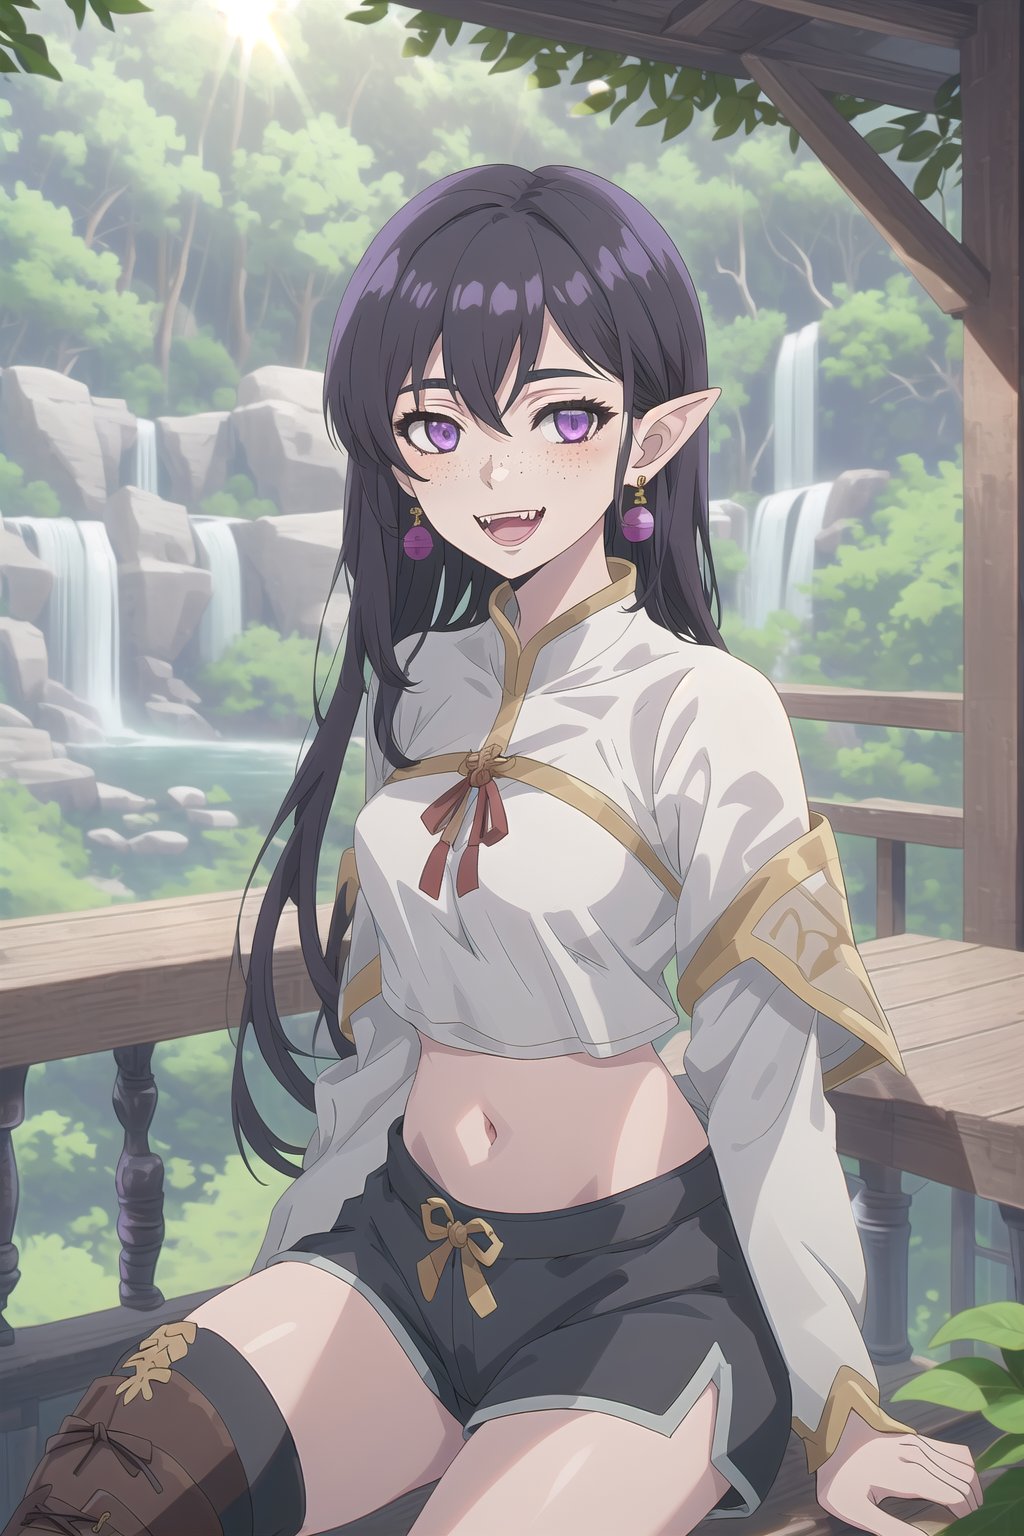 nier anime style illustration, best quality, masterpiece High resolution, good detail, bright colors, HDR, 4K. Dolby vision high. 

Archer elf girl with long straight black hair (hair on shoulders), purple eyes, freckles, blushing, purple earrings

Dark brown medieval fantasy style crop top

Showing navel, exposed navel 

Medieval fantasy dark brown shorts 

Elegant black medieval fantasy style boots 

apple tree forest 

Sunrise 

Intense sun rays between the trees

waterfalls in the distance

Flirty smile (Yandere smile). Happy, excited. Open mouth

Showing fangs, exposed fangs

Selfie,nier anime style

Sitting,nier anime style

Black hair 